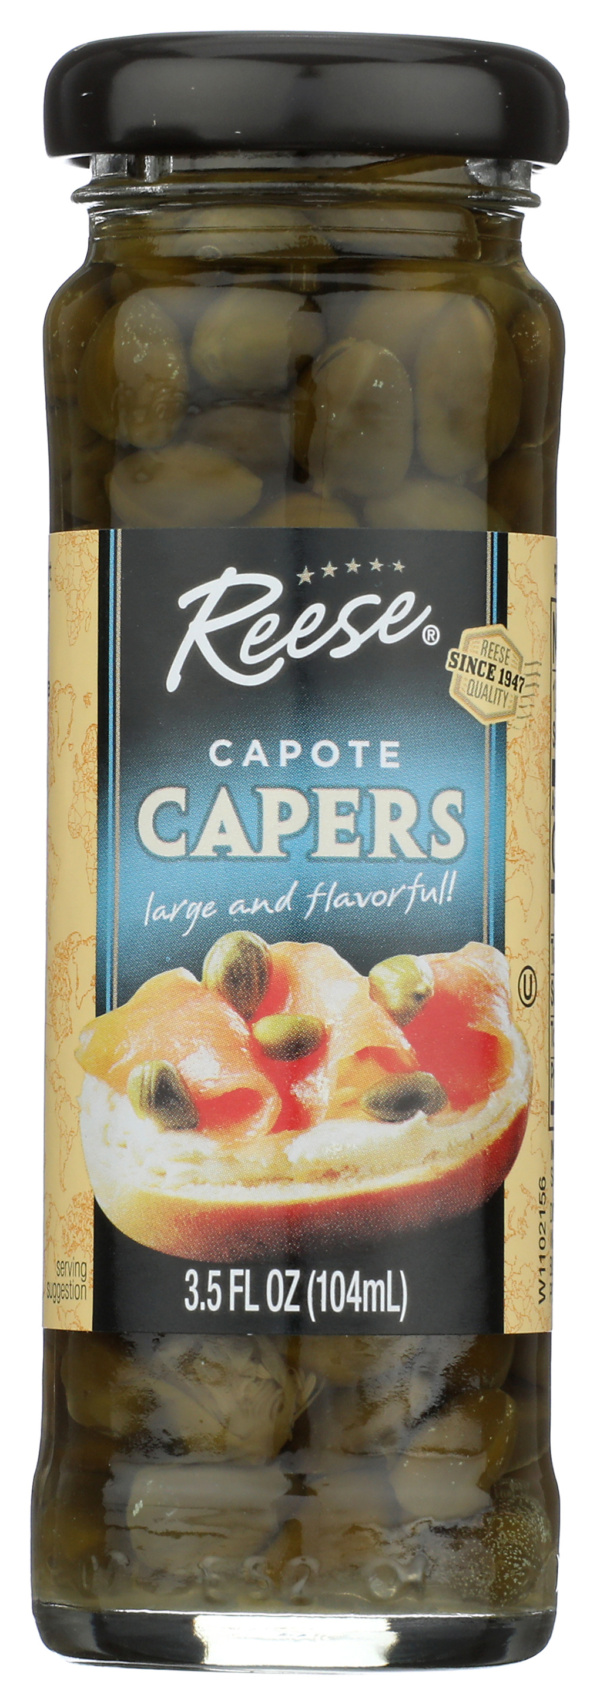 Capote Capers